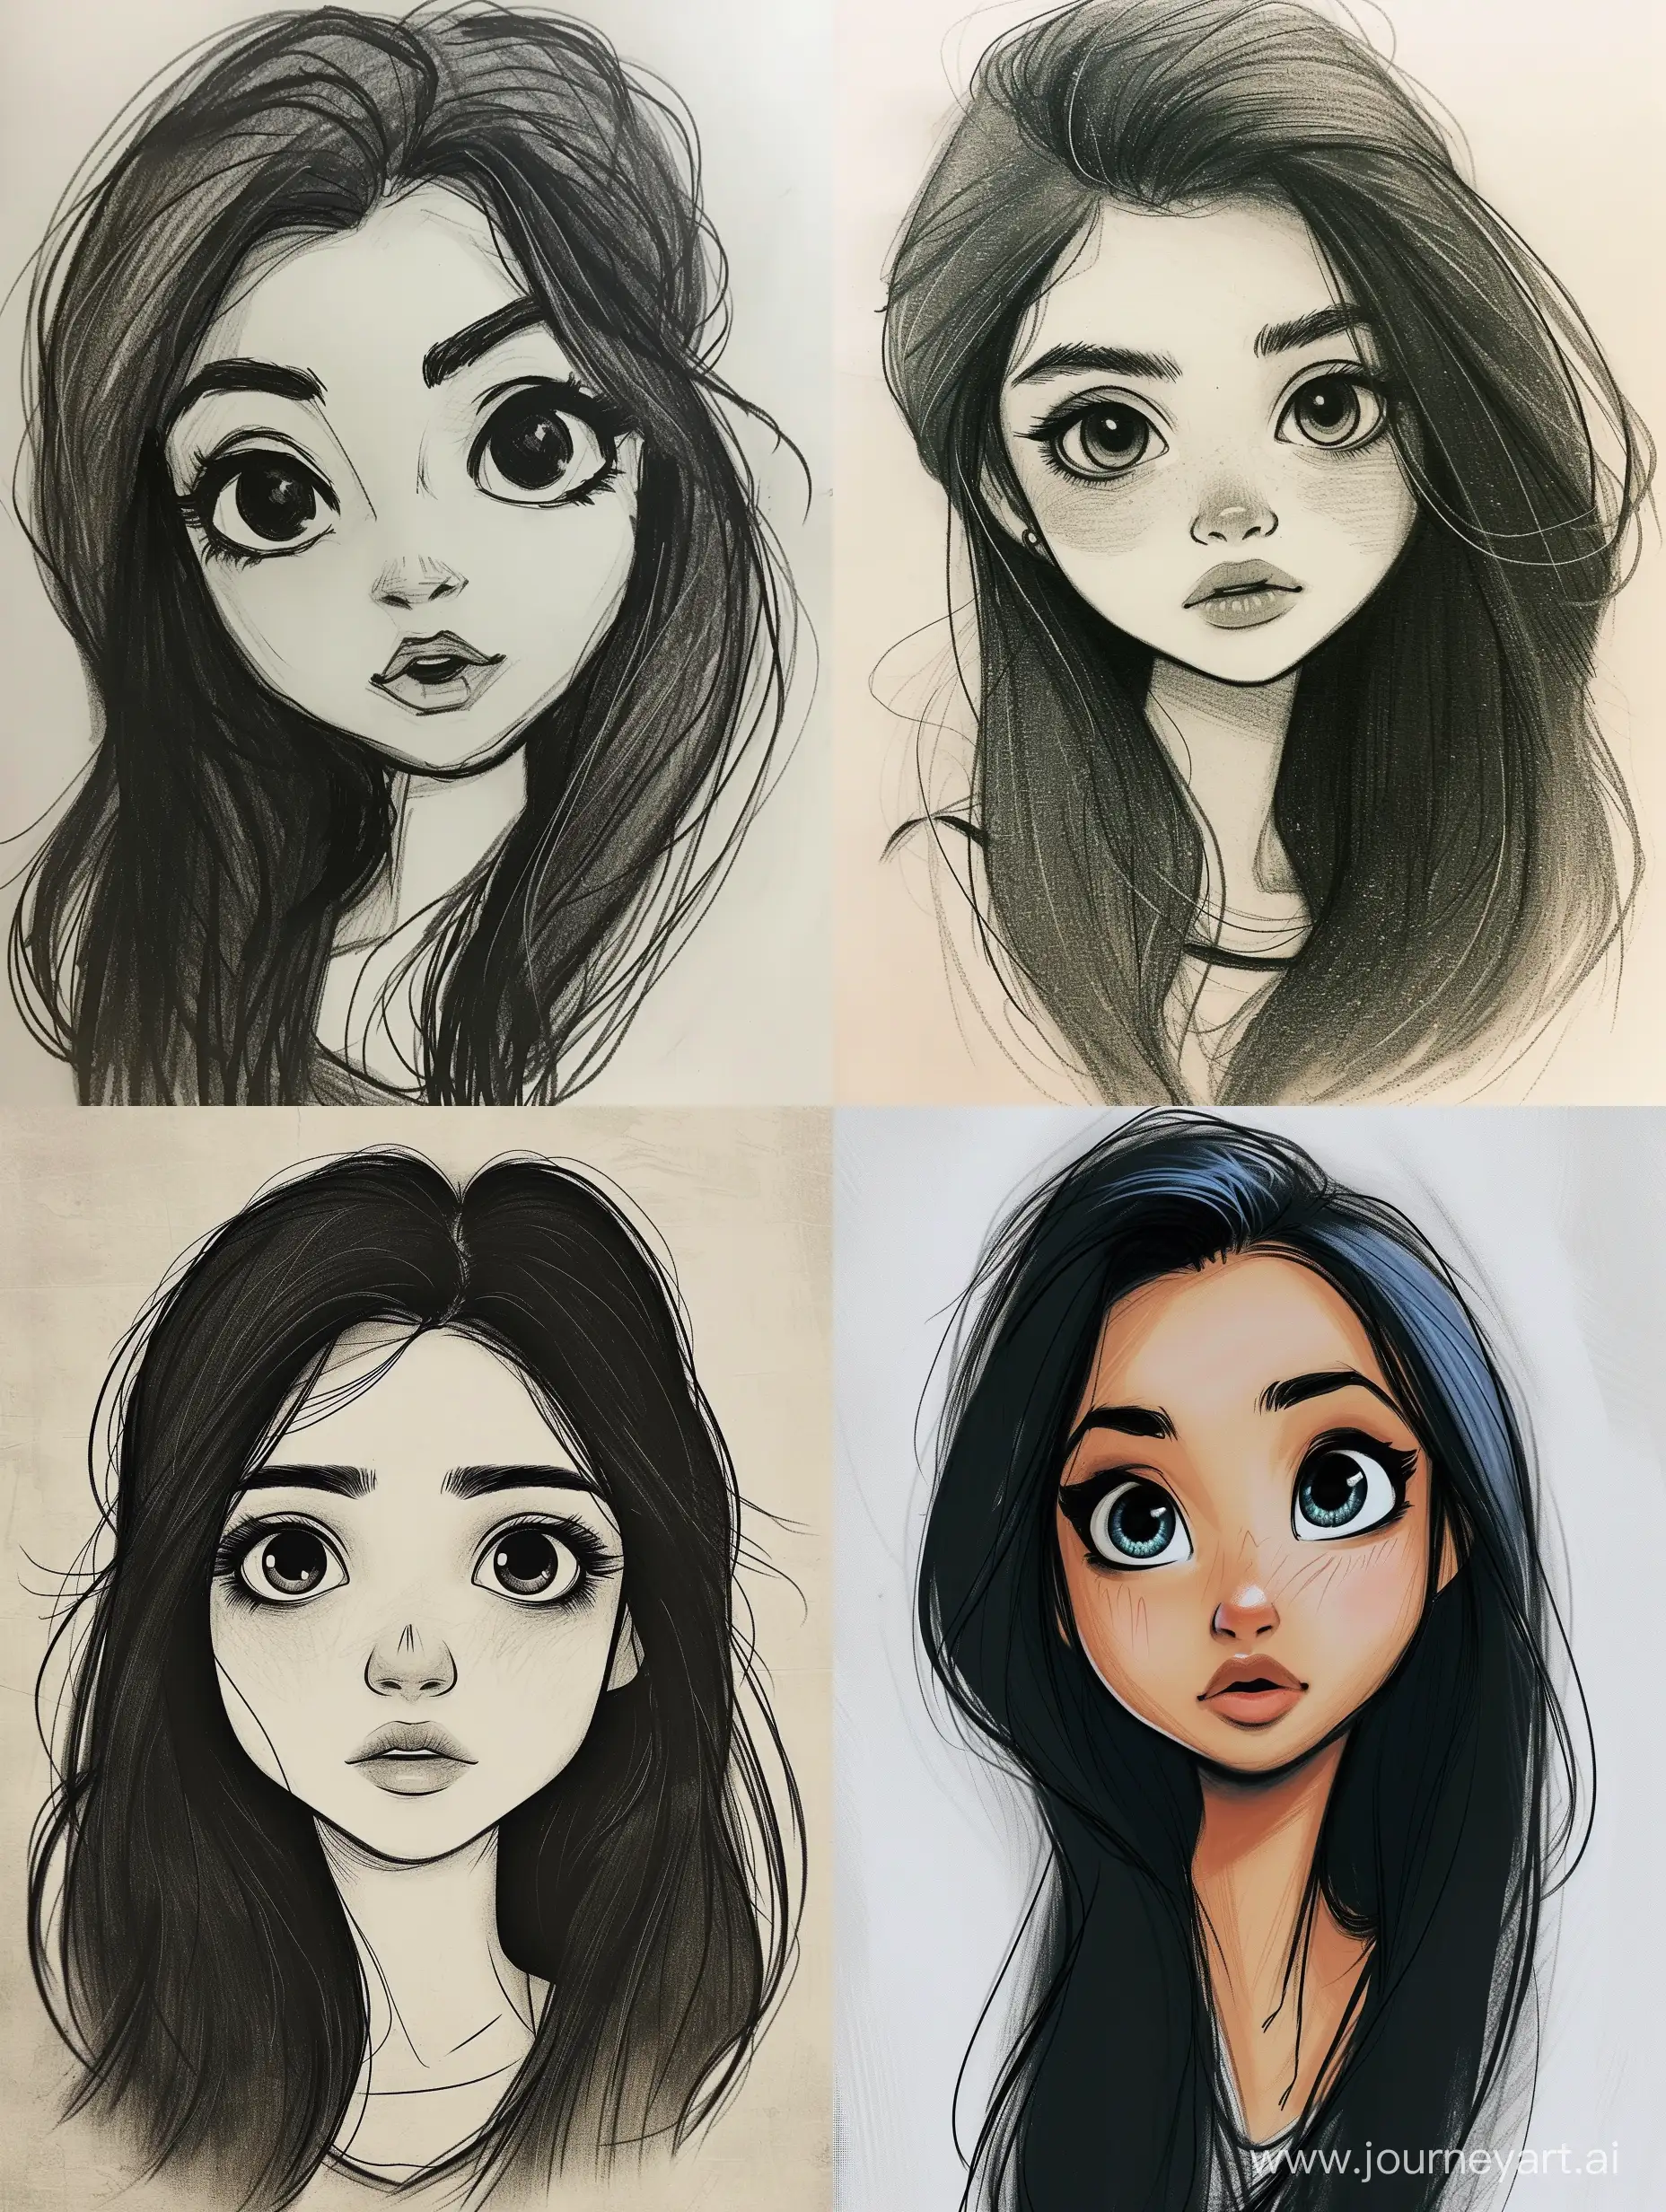 an Bangladeshi girl, sketched drawing, matisse style, the girl Bangladeshi has beautiful eyes and her hair is long length, her hair is black and cool style, her nose is big and wide, a single eyebrow, wider lips, oval face shape in 4k quality, girl is cute vibes with sexy eyes and beautiful